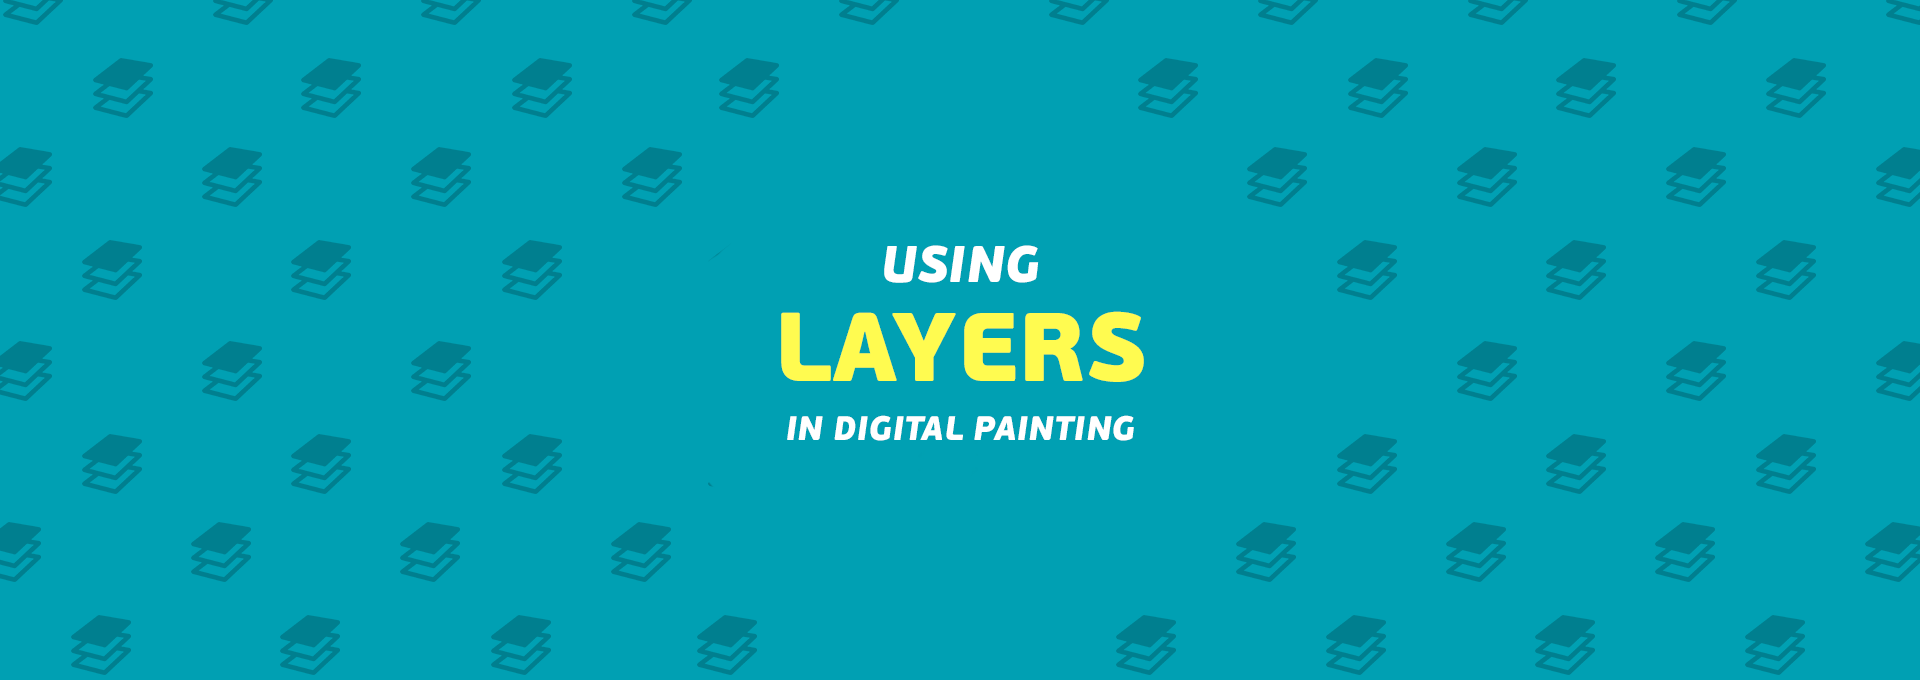 How to Use Photoshop Layers in Digital Painting